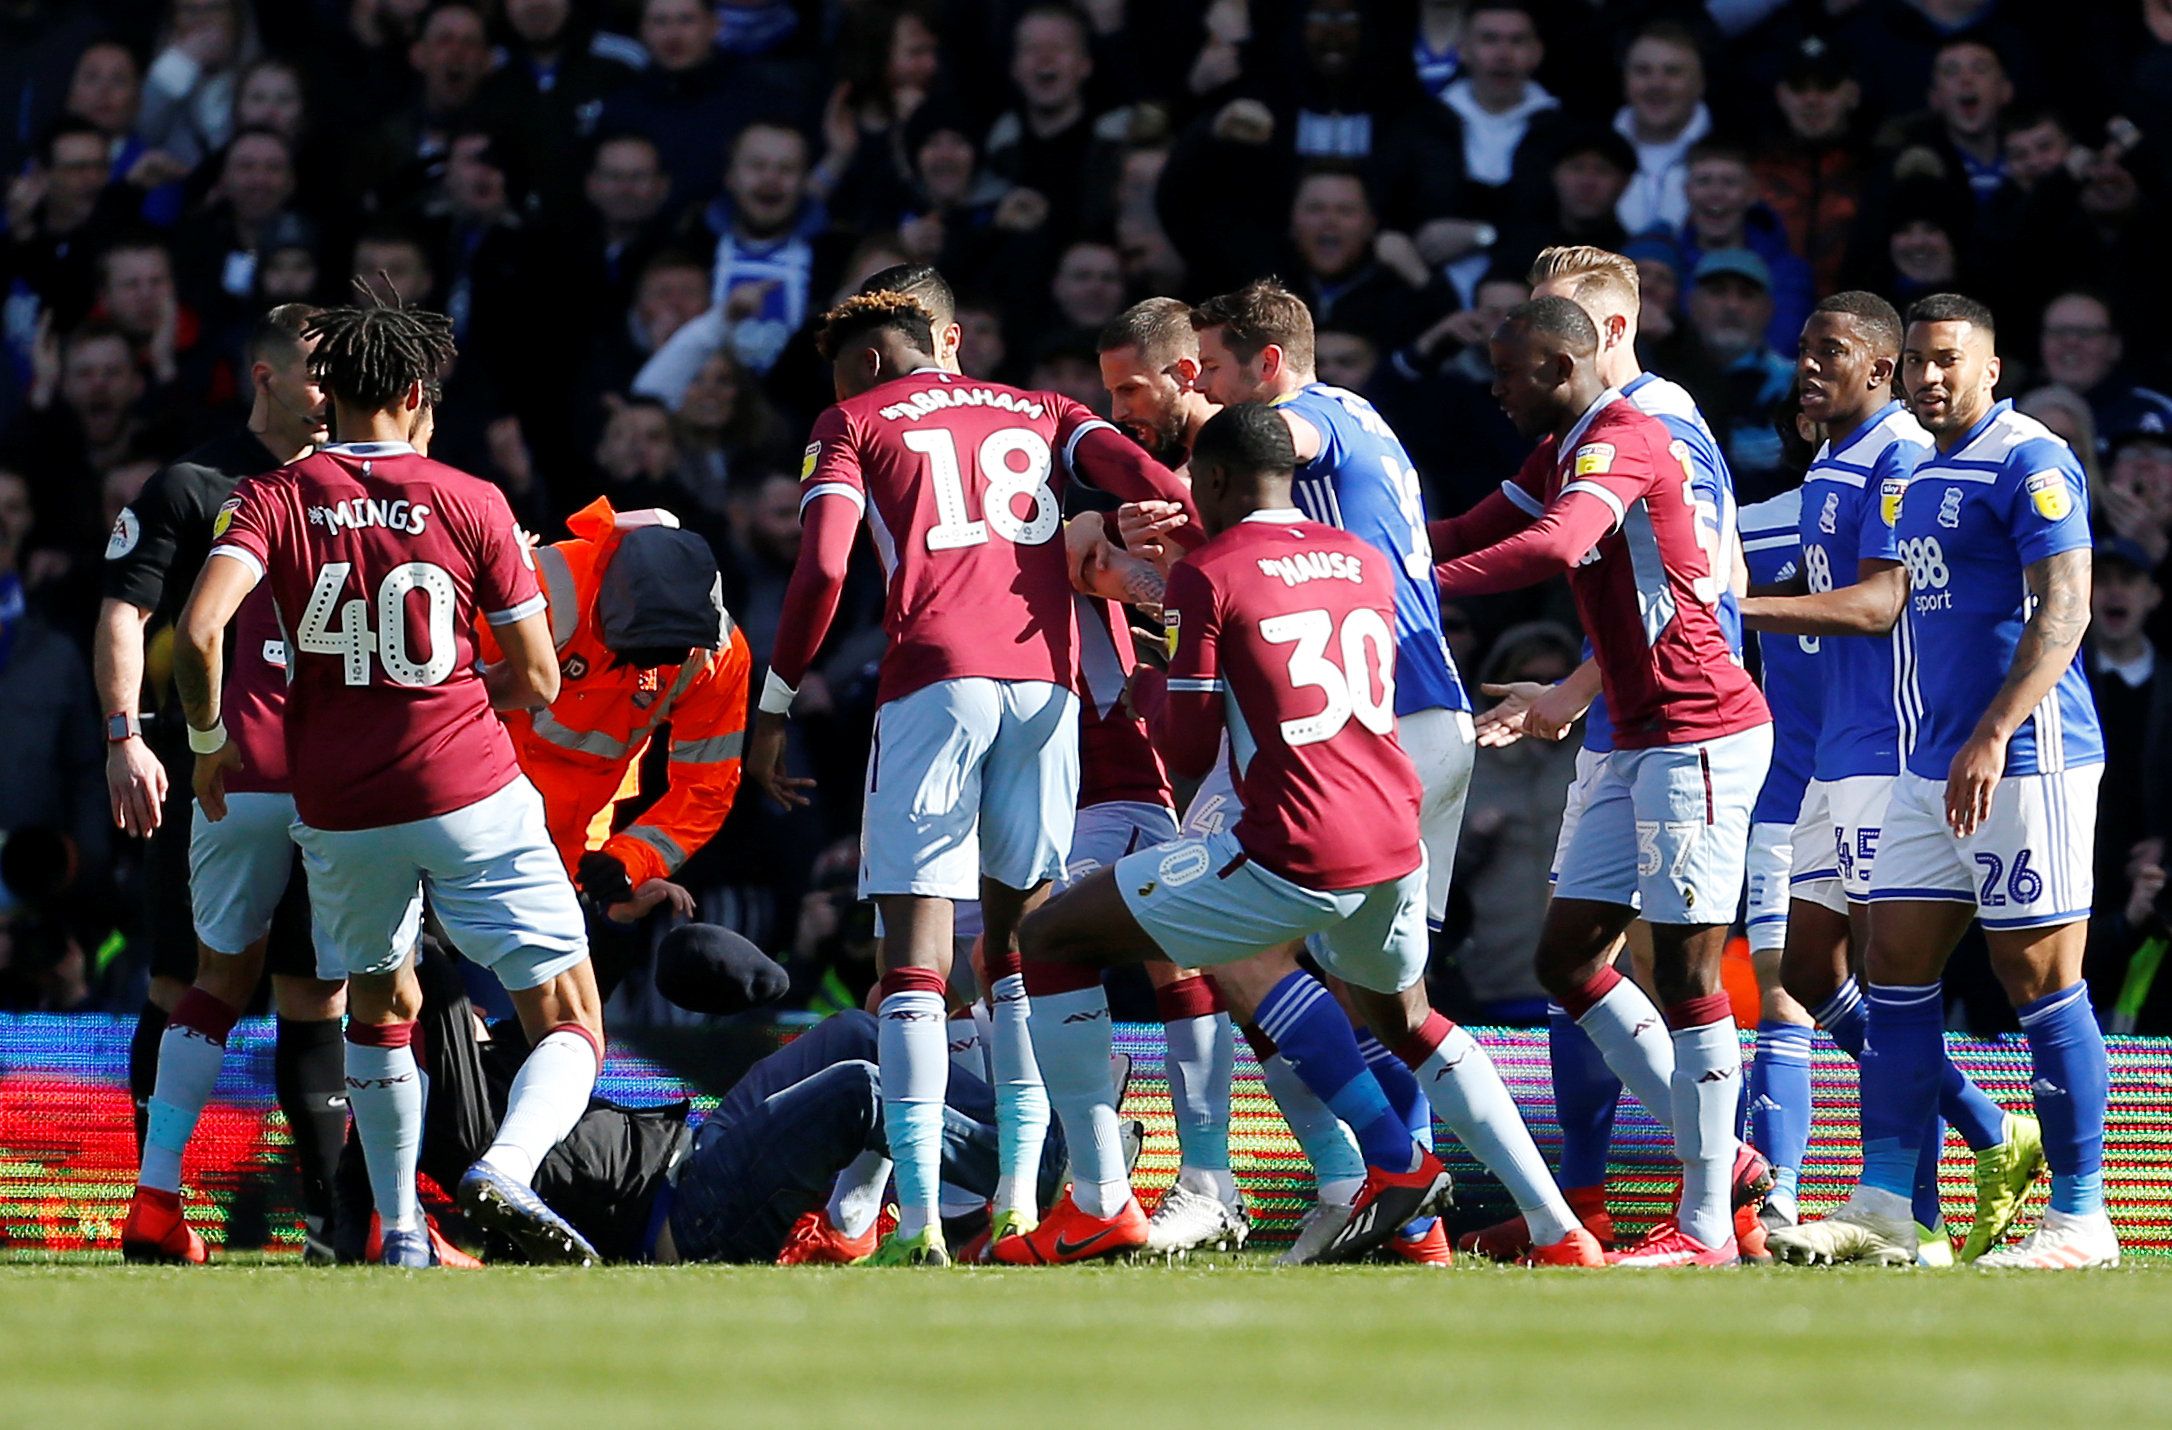 Soccer Football - Championship - Birmingham City v Aston Villa - St Andrew's, Birmingham, Britain - March 10, 2019   Aston Villa players react after a fan invades the pitch and attacks Jack Grealish   Action Images via Reuters/Craig Brough    EDITORIAL USE ONLY. No use with unauthorized audio, video, data, fixture lists, club/league logos or 